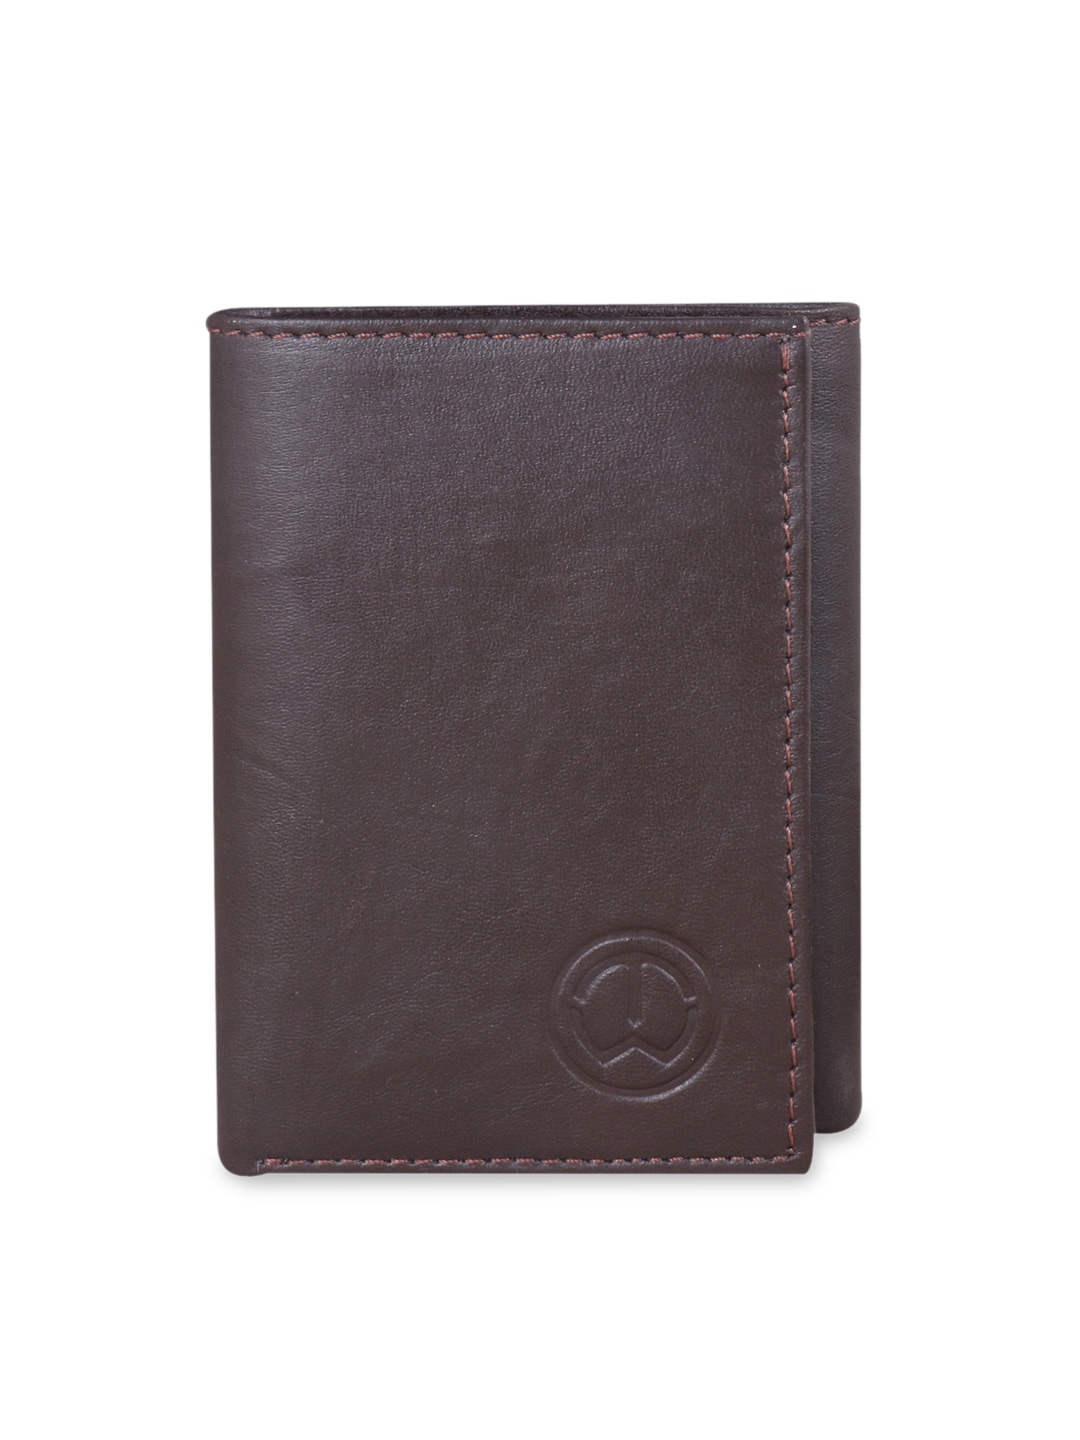 TnW Unisex Brown Solid Leather Three Fold Wallet Price in India